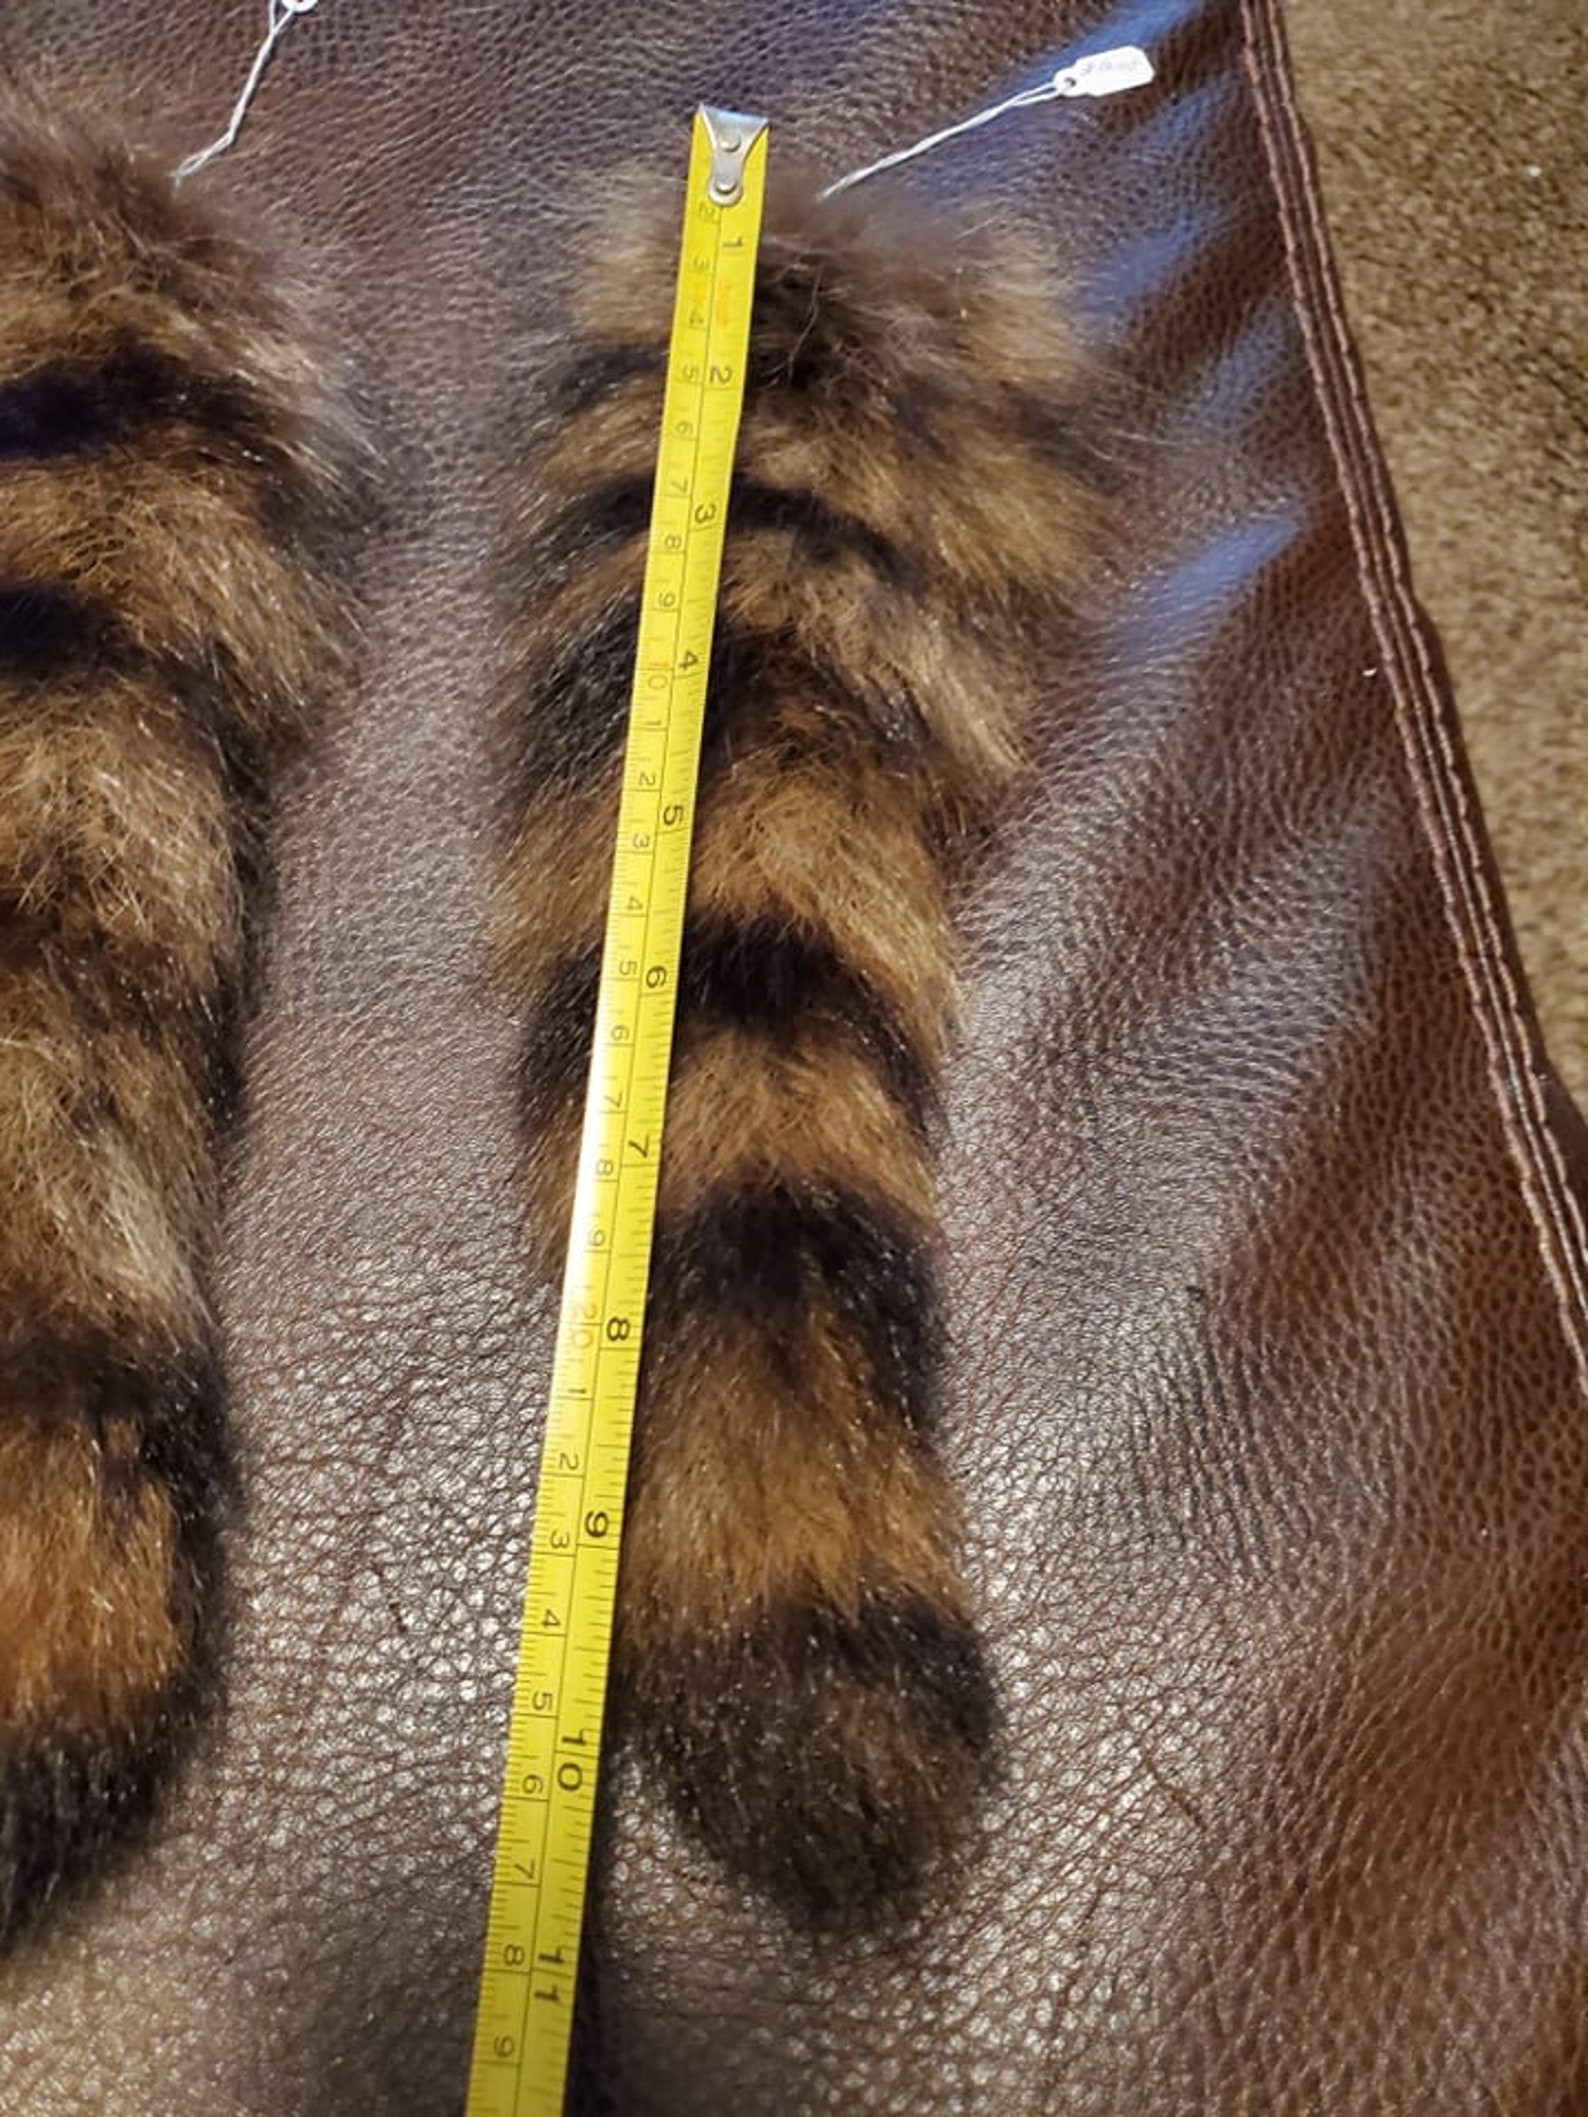 Ethically sourced Raccoon Tails great for crafting clothing | Etsy